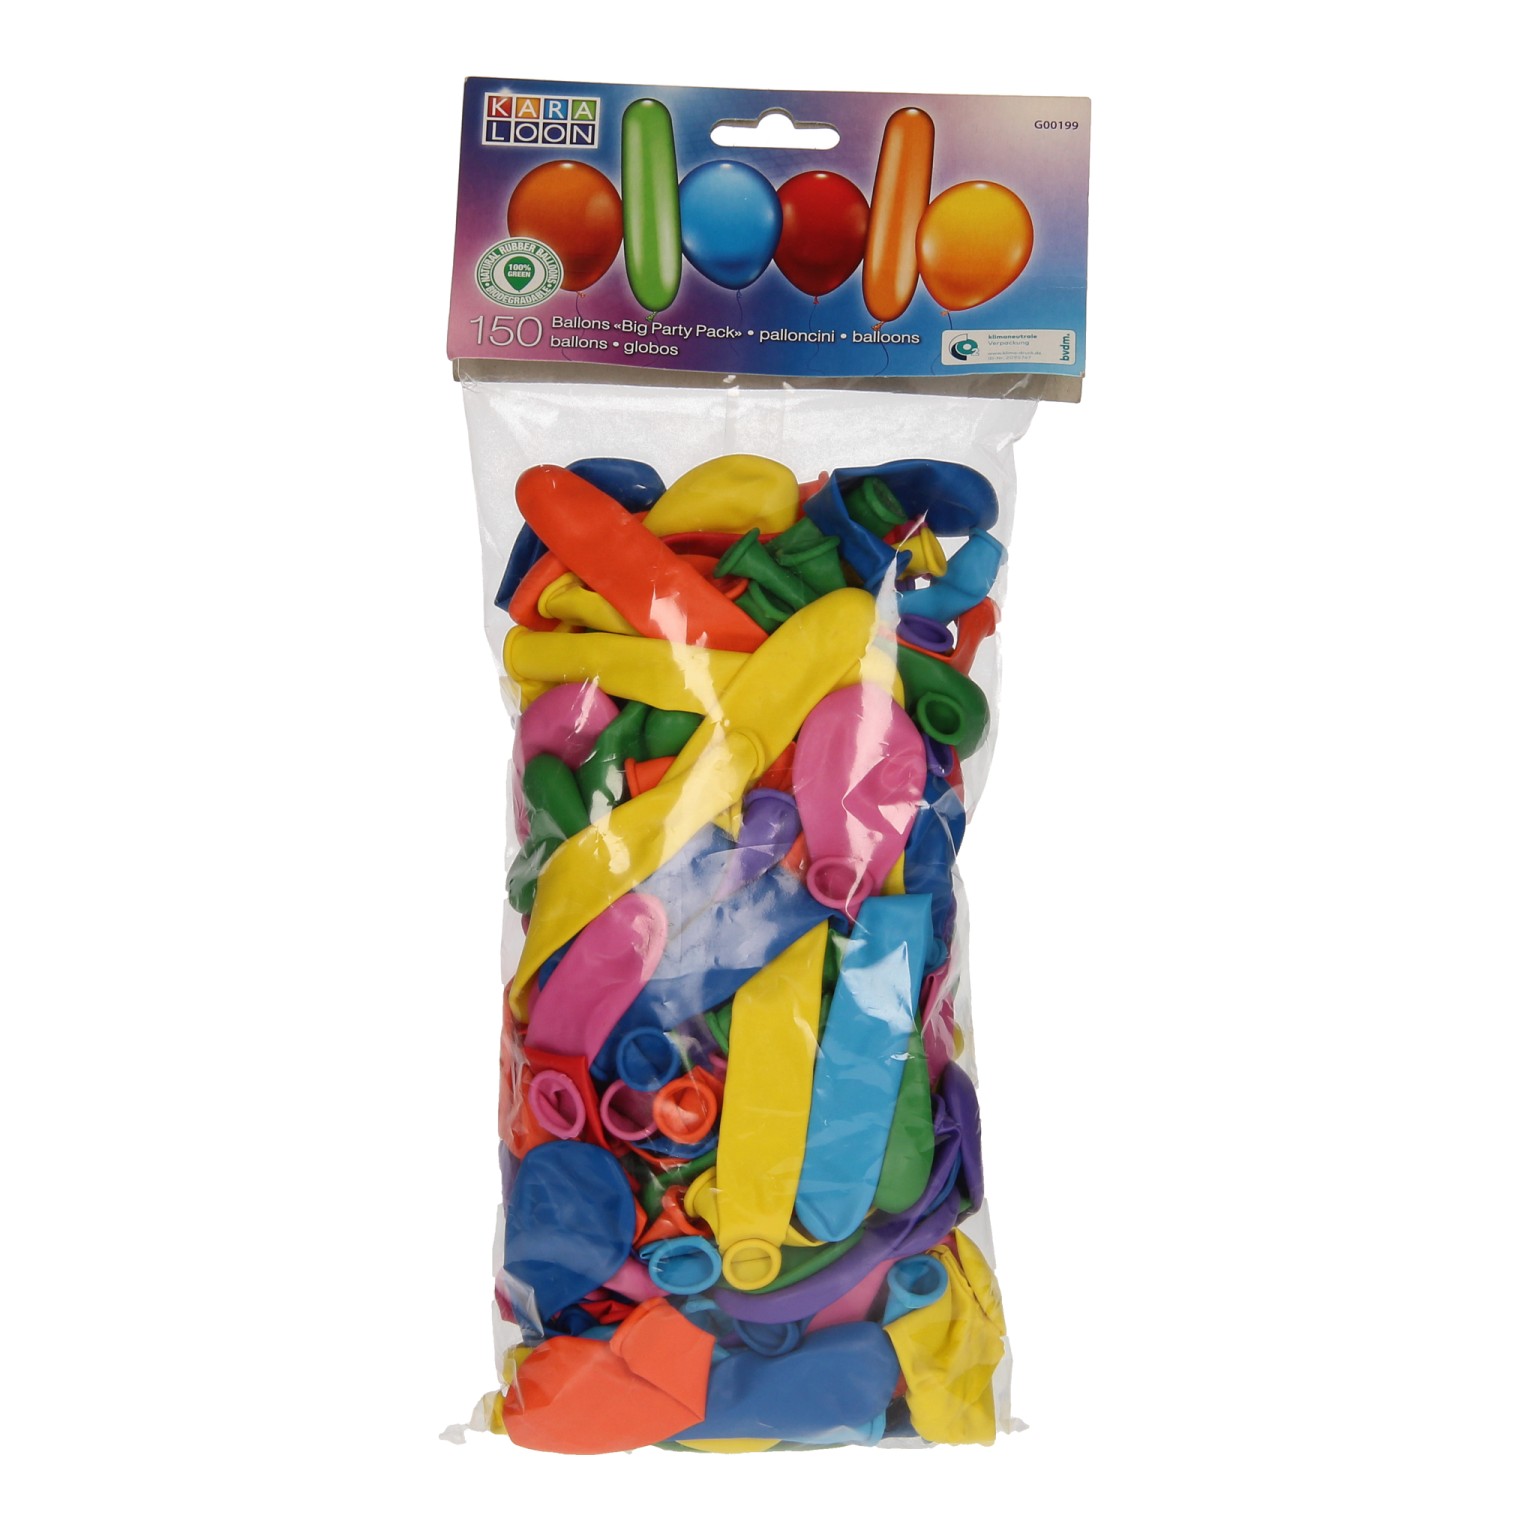 Karaloon G00199 150 Balloons Big Party Pack Multi Colour